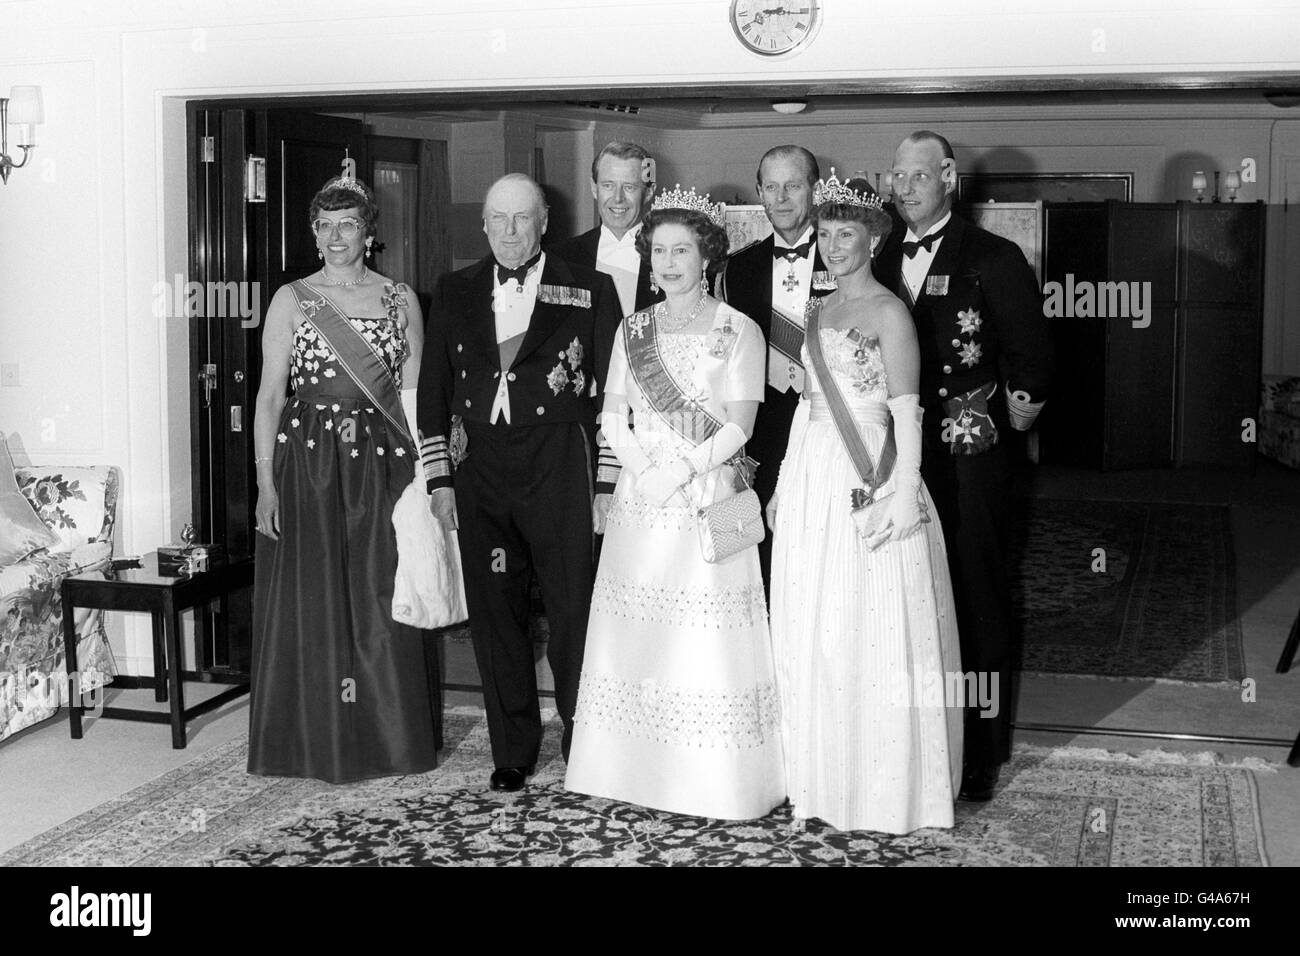 Queen Elizabeth II and the Duke of Edinburgh with the Norwegian Royal  Family before going in to dinner when she hosted a State Banquet aboard the  Royal Yacht Britannia in Oslo. The